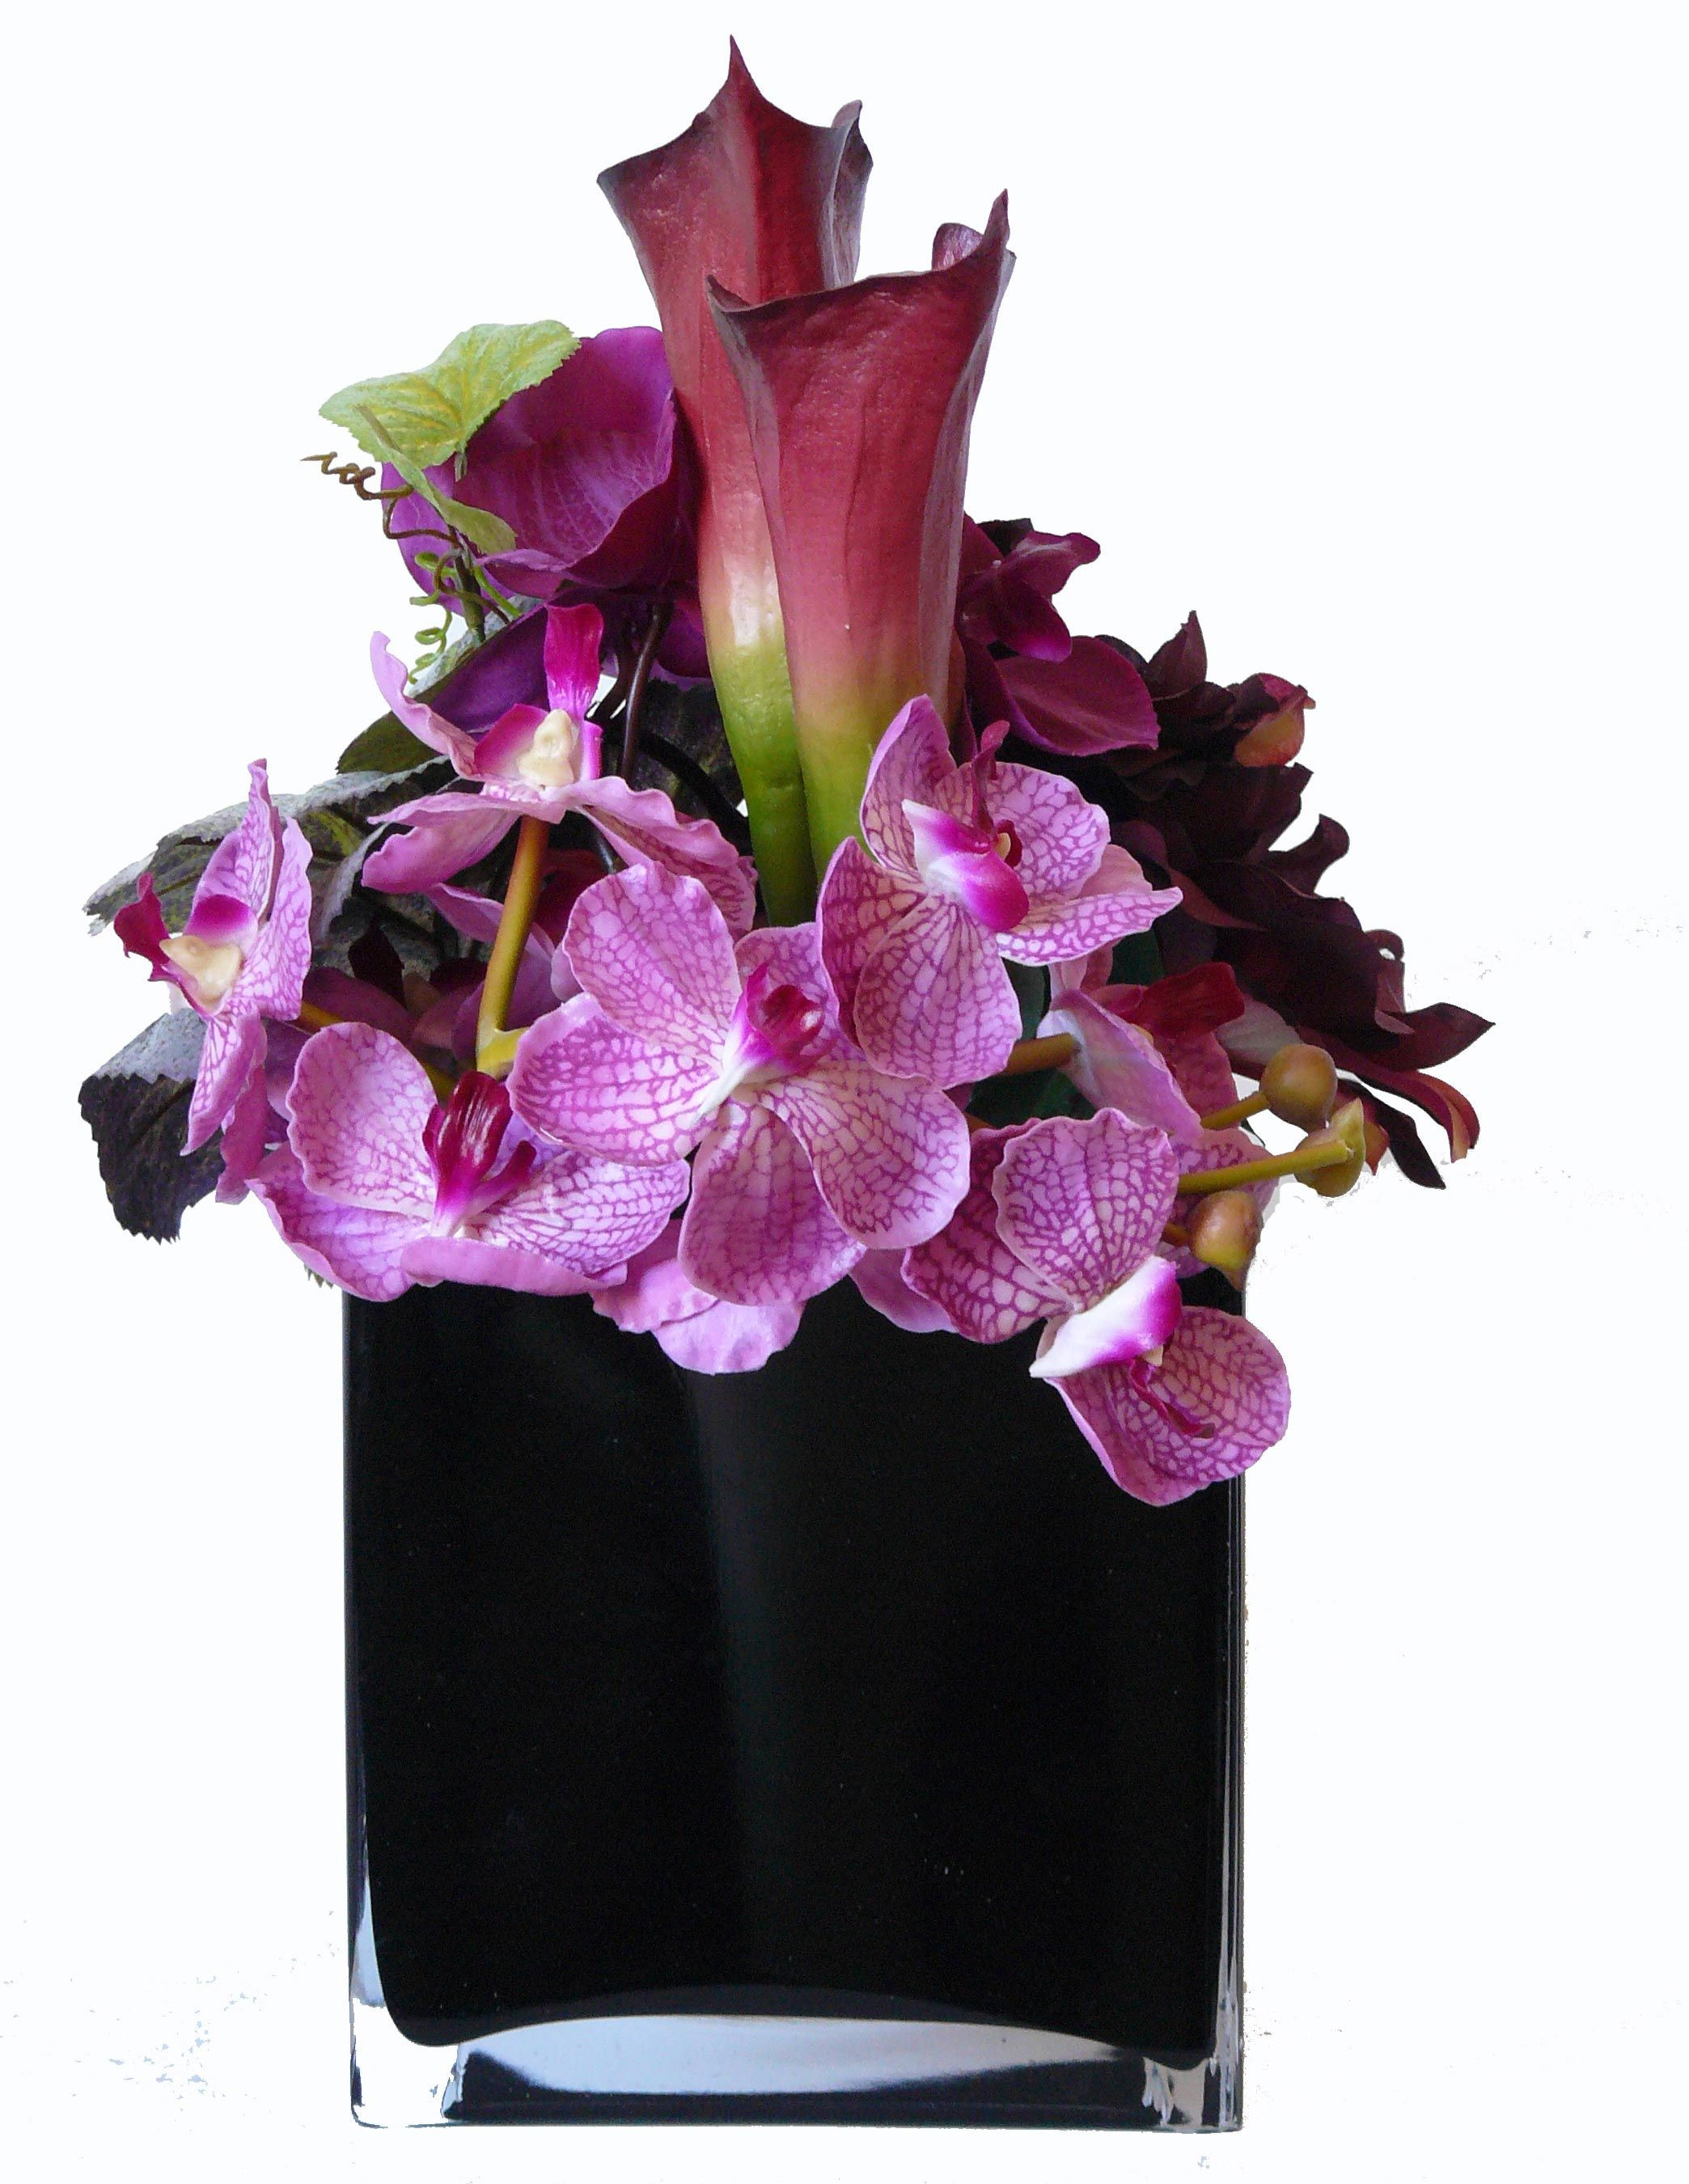 27 Best Cube Vase Centerpieces 2024 free download cube vase centerpieces of moss centerpieces cubes www topsimages com intended for purple flowers in black cube vase buffet and centerpiece ideas jpg 2088x2700 moss centerpieces cubes